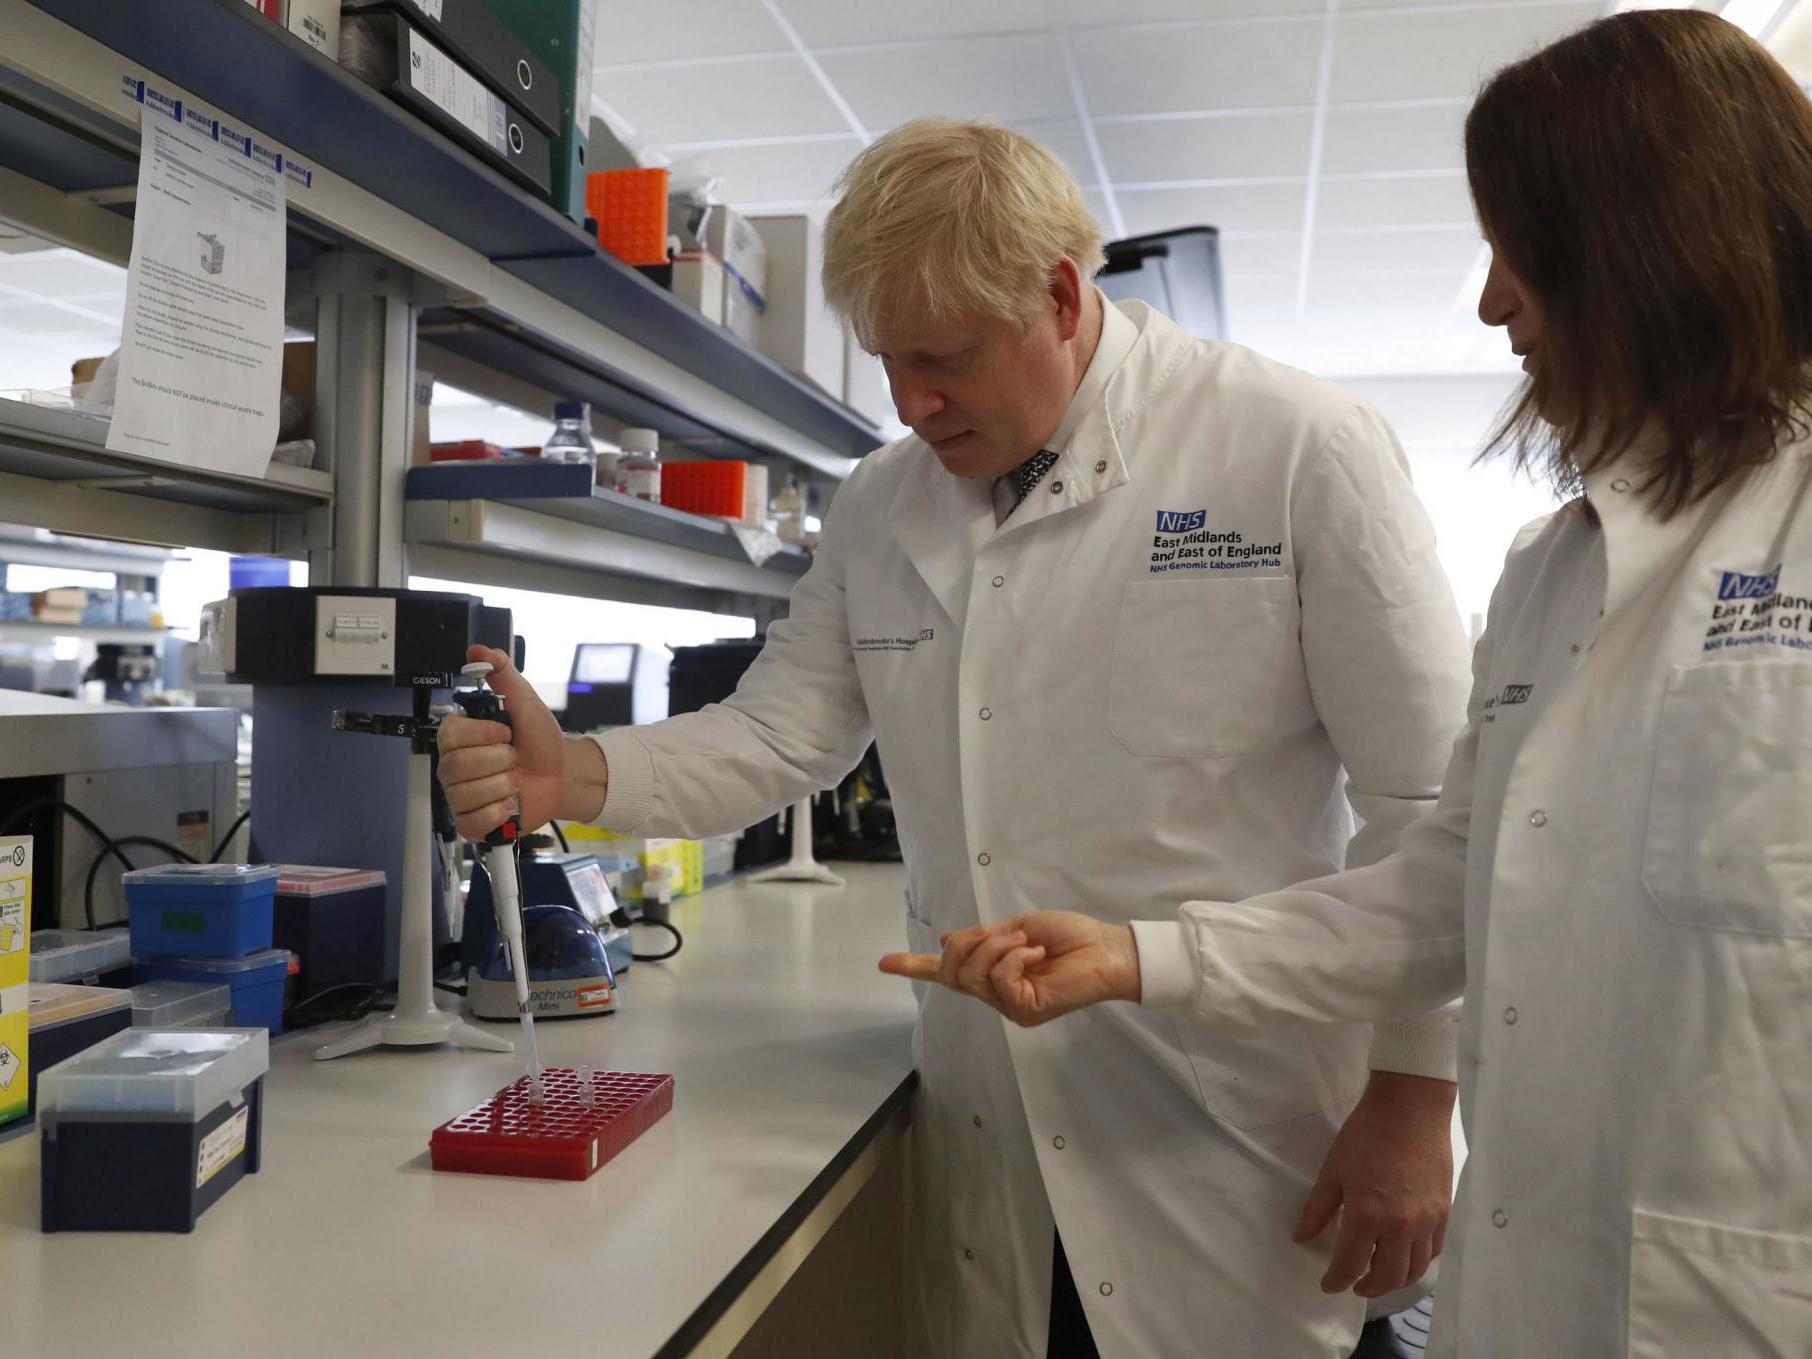 Boris Johnson speaks to Dr Sarah Bowdin during a visit to the National Institute for Health Research at the Cambridge Clinical Research Facility, in Addenbrooke's Hospital in Cambridge